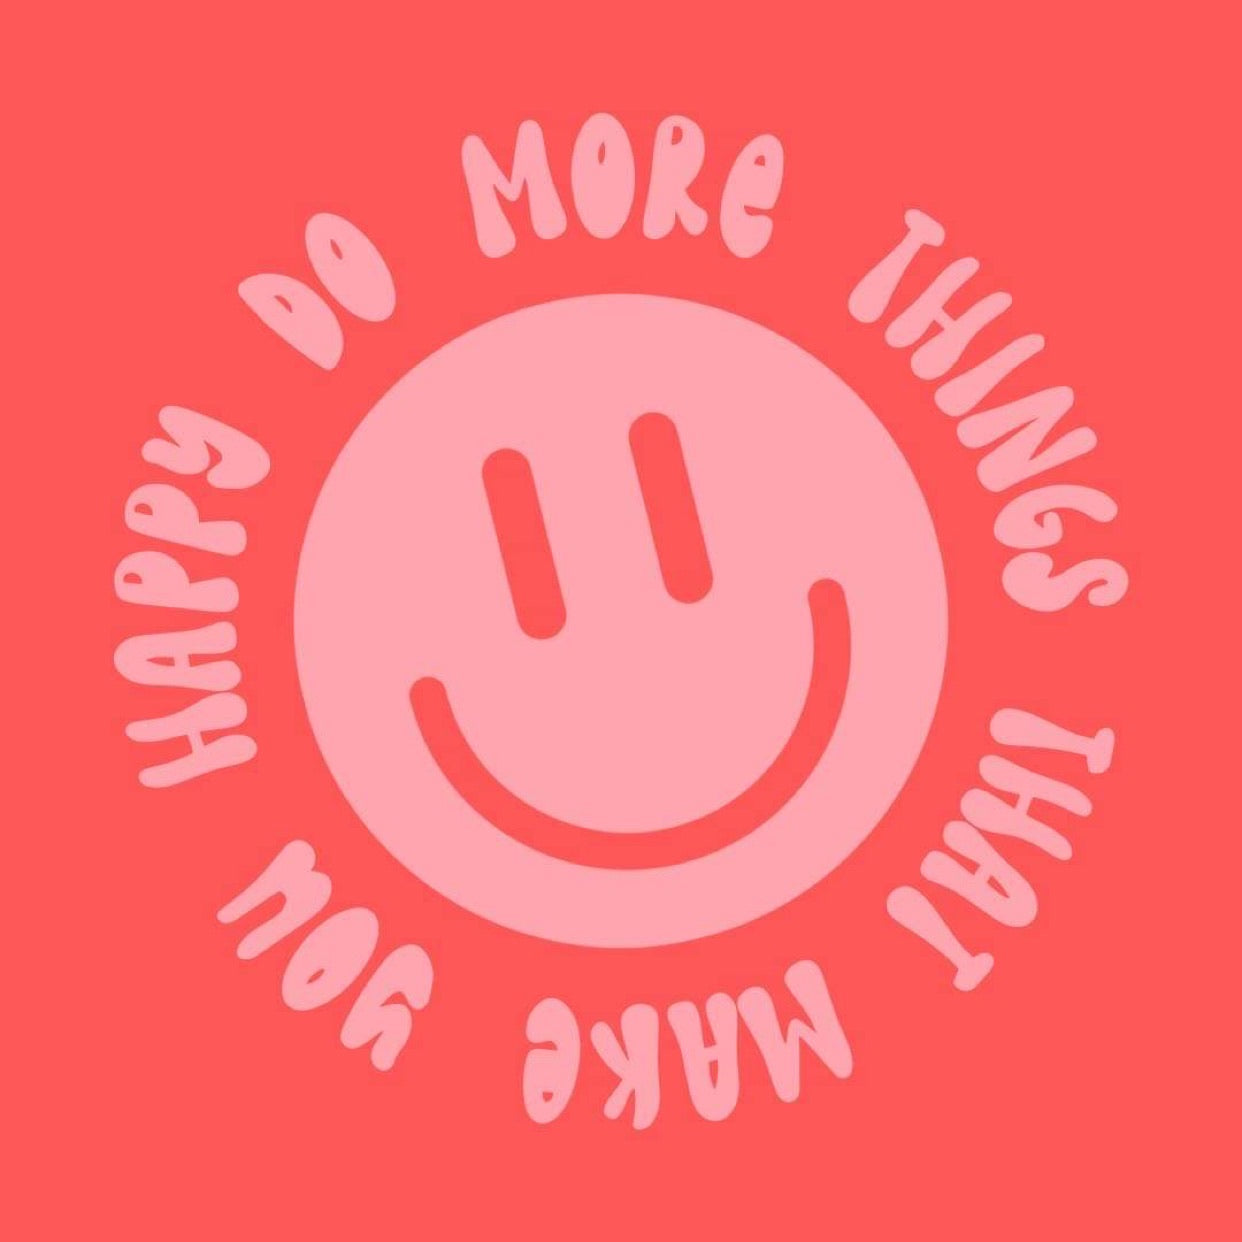 do more things that make you happy t shirt